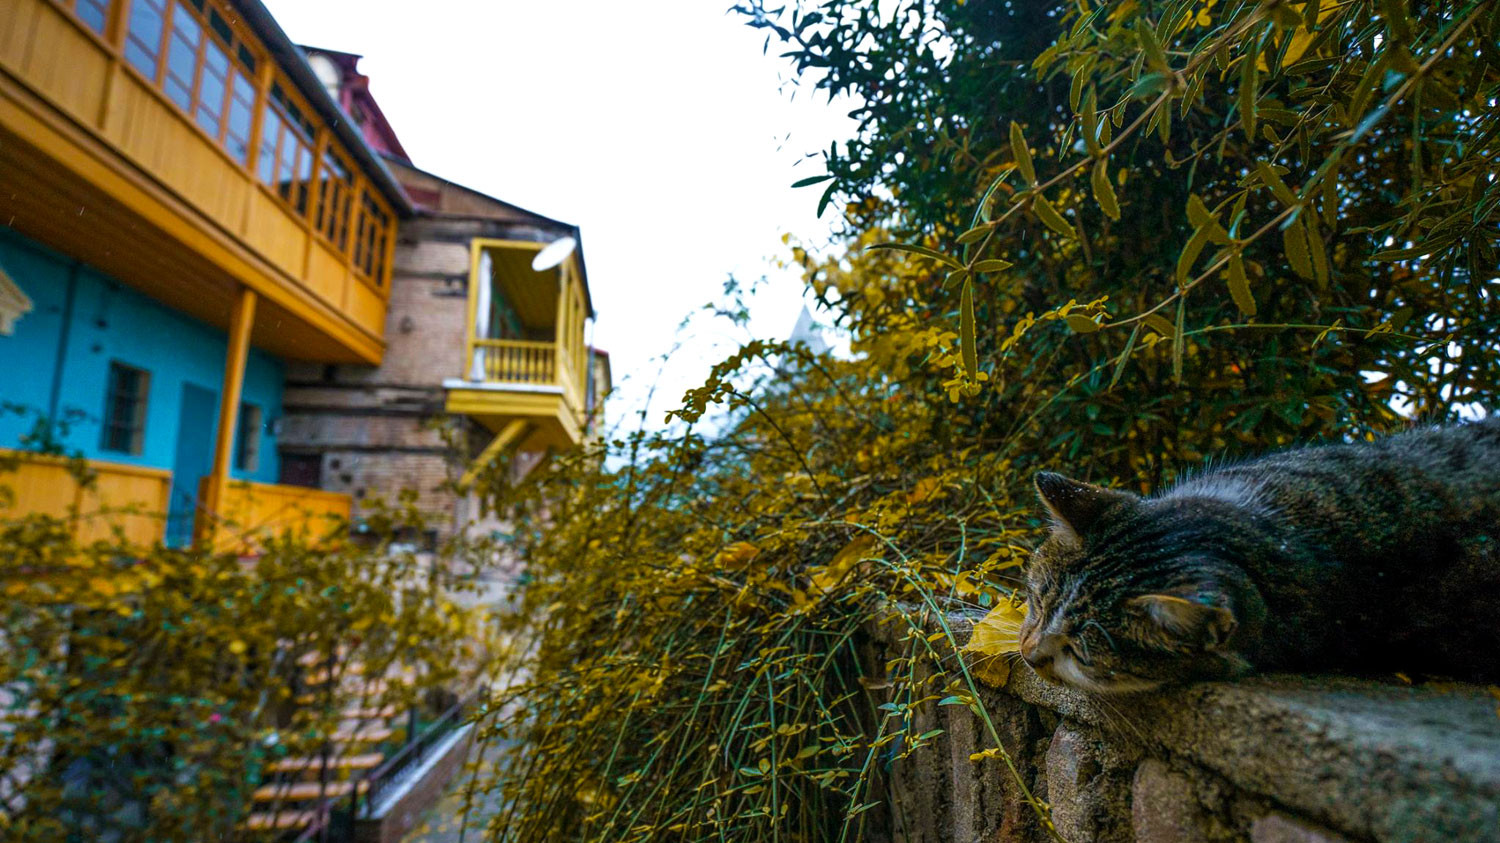 Wooden Houses in Tbilisi